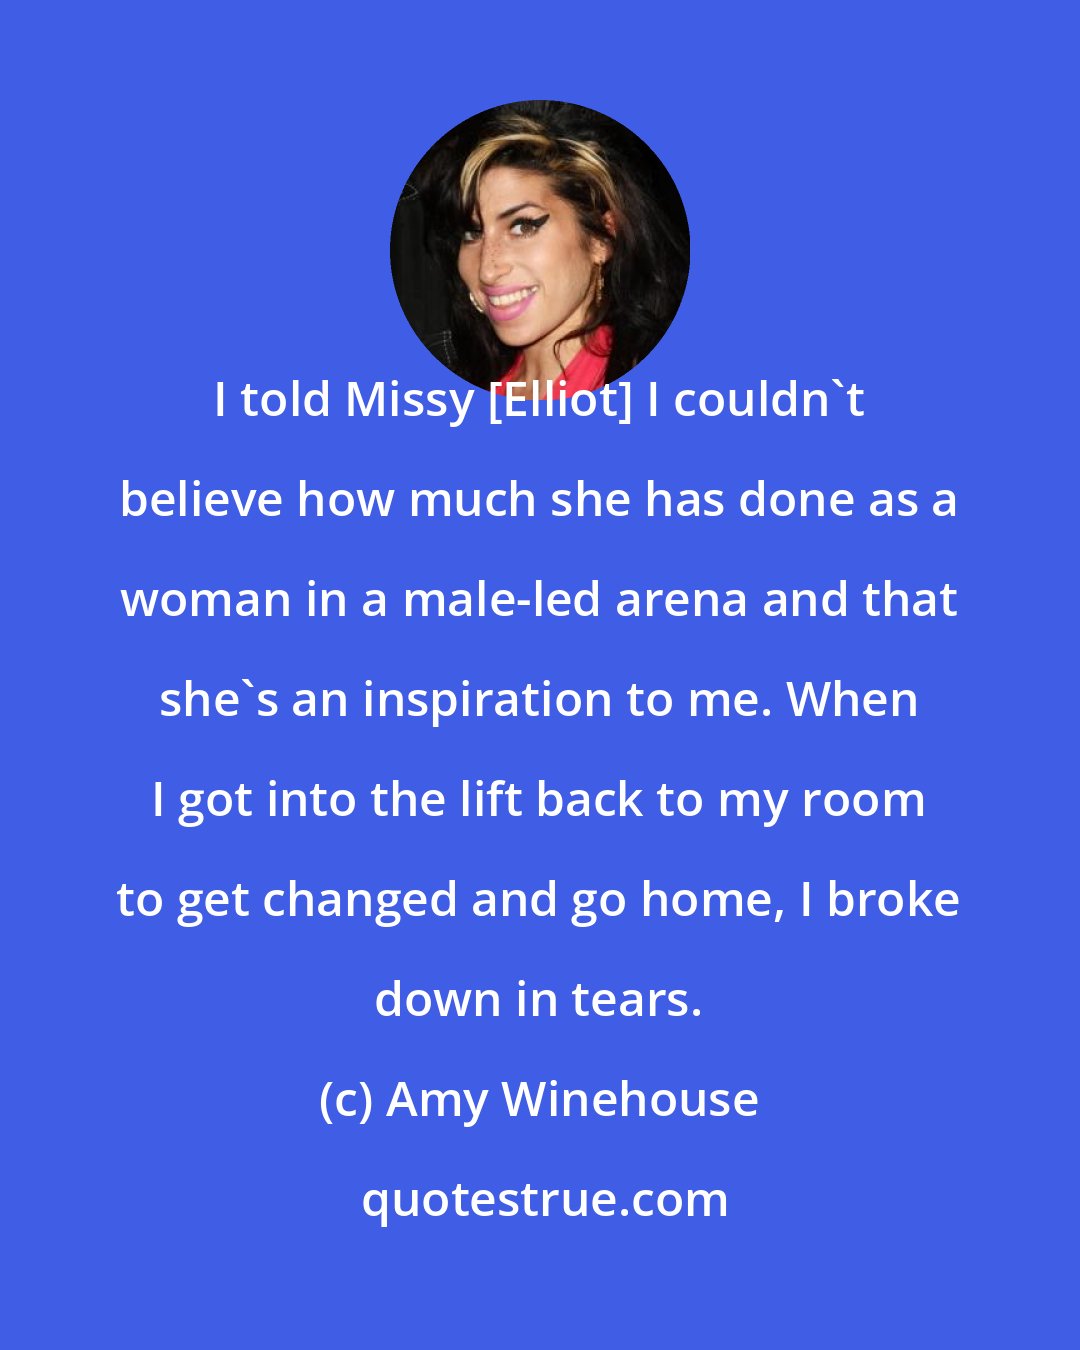 Amy Winehouse: I told Missy [Elliot] I couldn't believe how much she has done as a woman in a male-led arena and that she's an inspiration to me. When I got into the lift back to my room to get changed and go home, I broke down in tears.